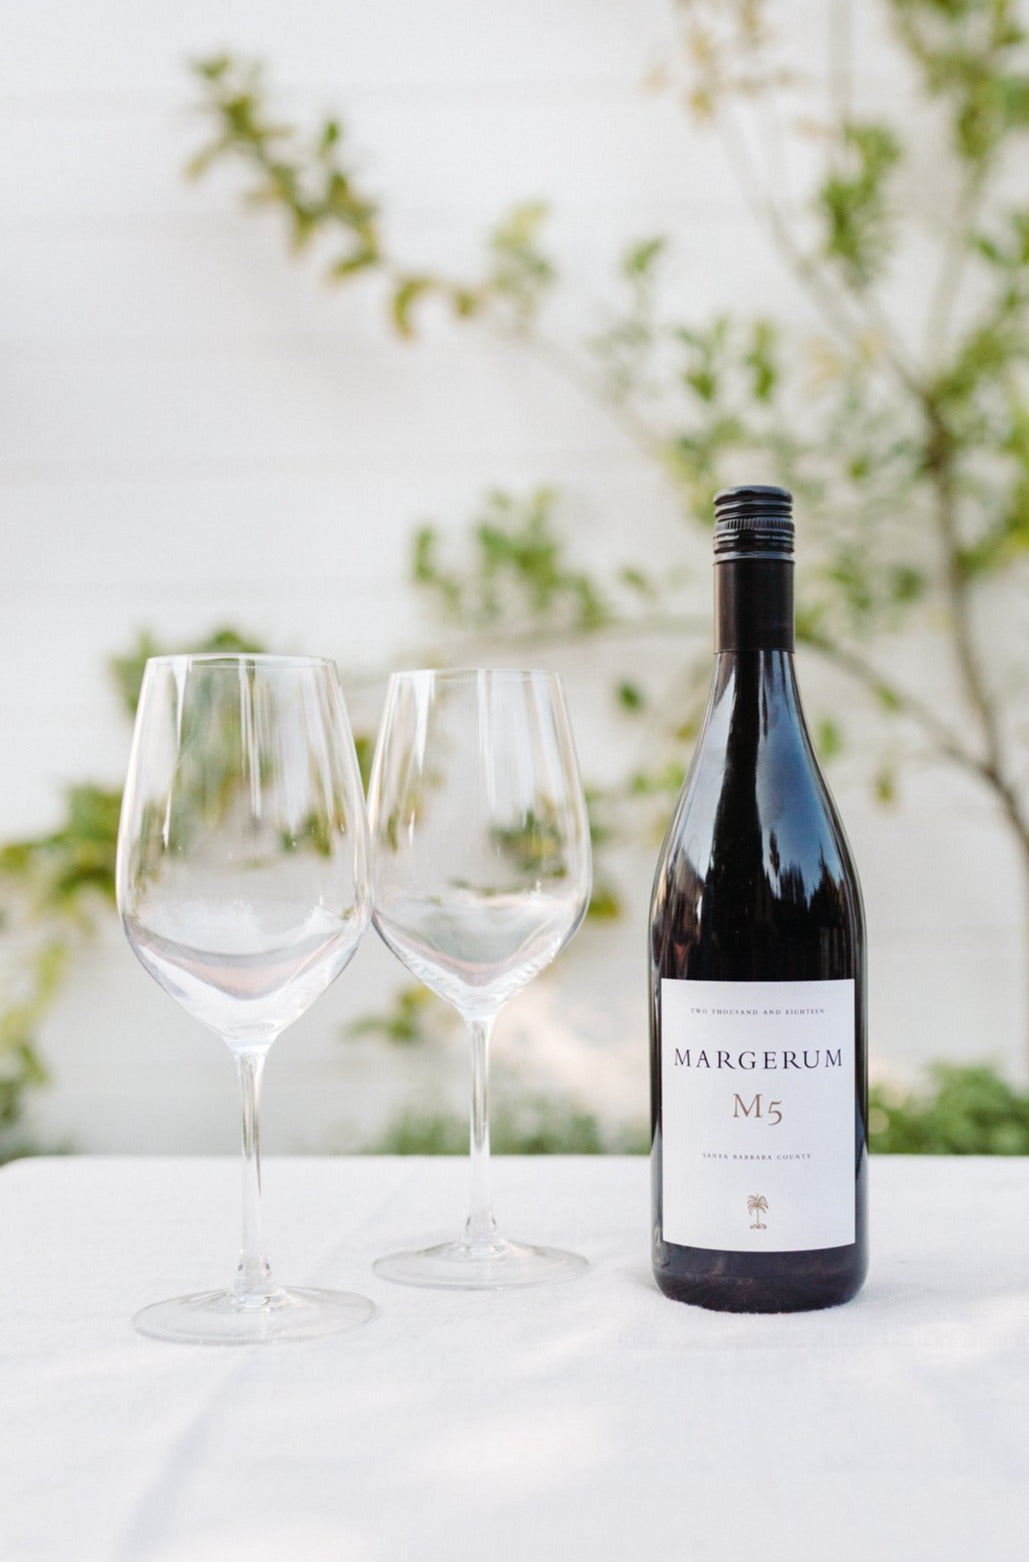 Bottle of Margerum's M5 rhrone blend on a table with wines glasses and vines behind it